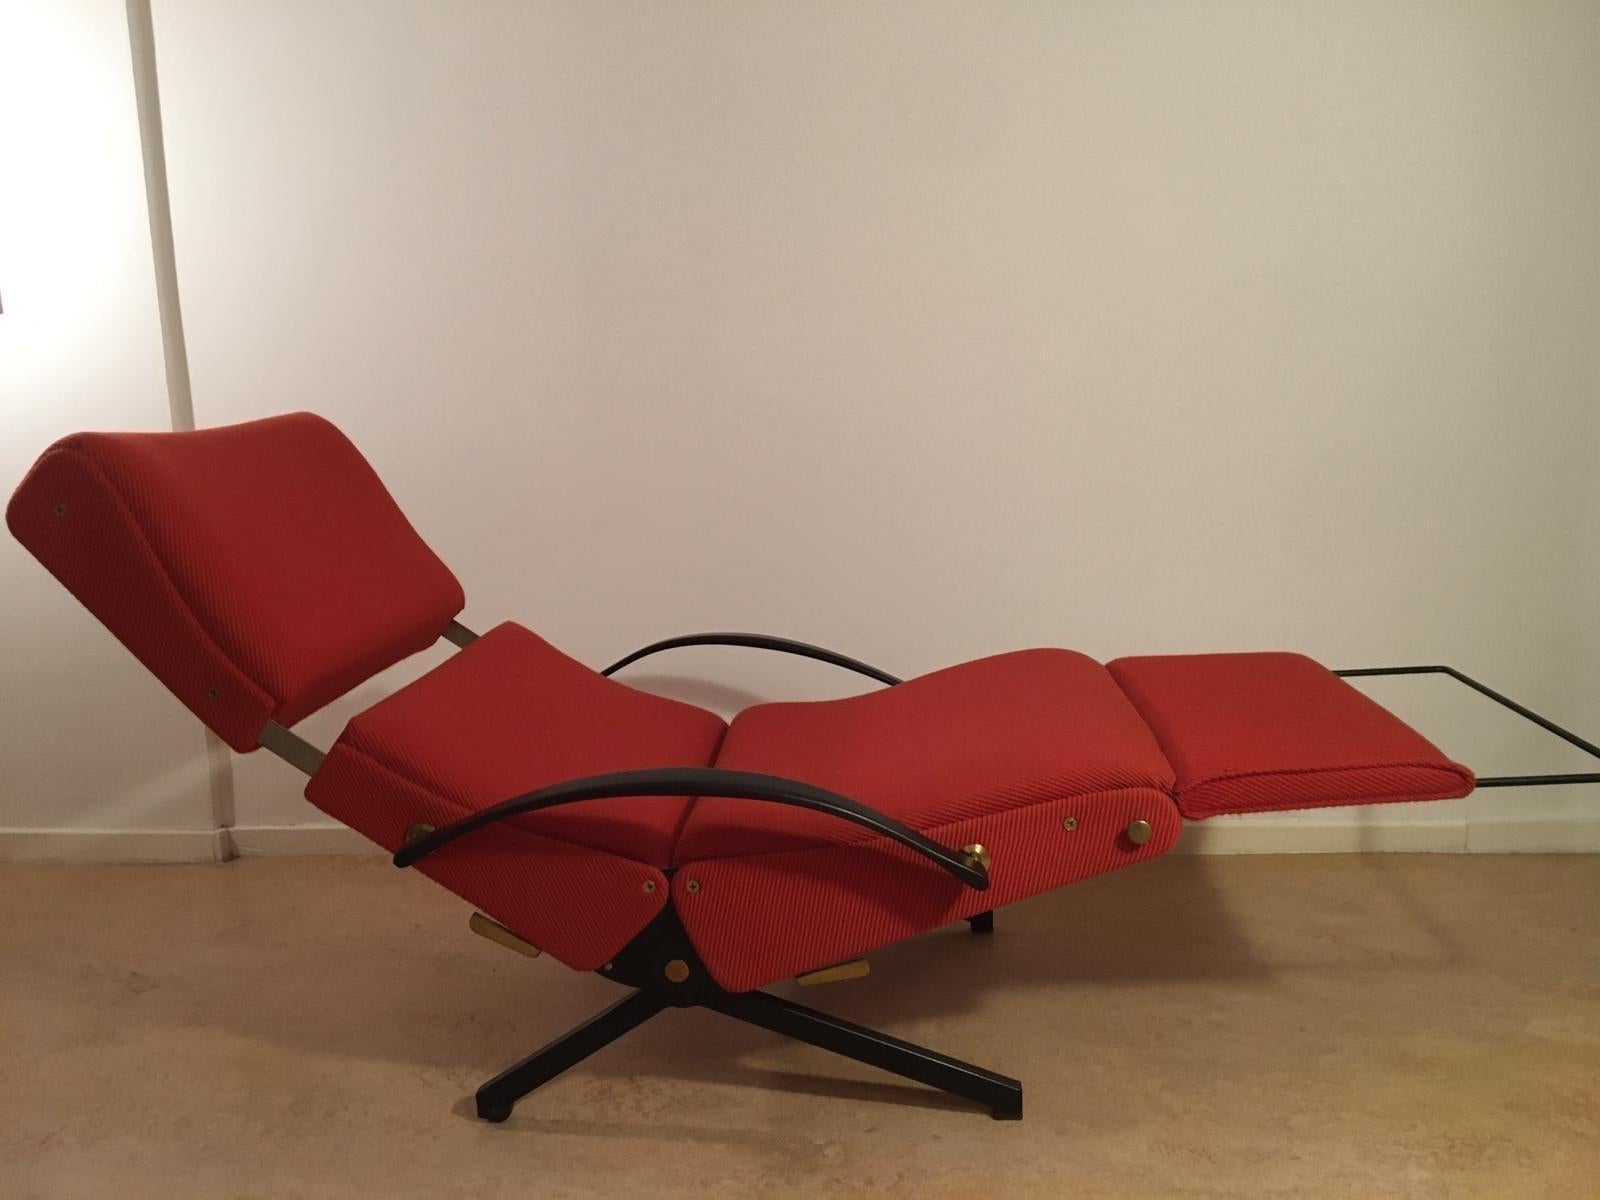 Osvaldo Borsani P40 lounge chair from Tecno, Italy, 1950s. Thisthe is First version by P40 chairs .The chair can be change into different positions. The seat back and footrest are adjustable separately from each other, The mechanisms are fully